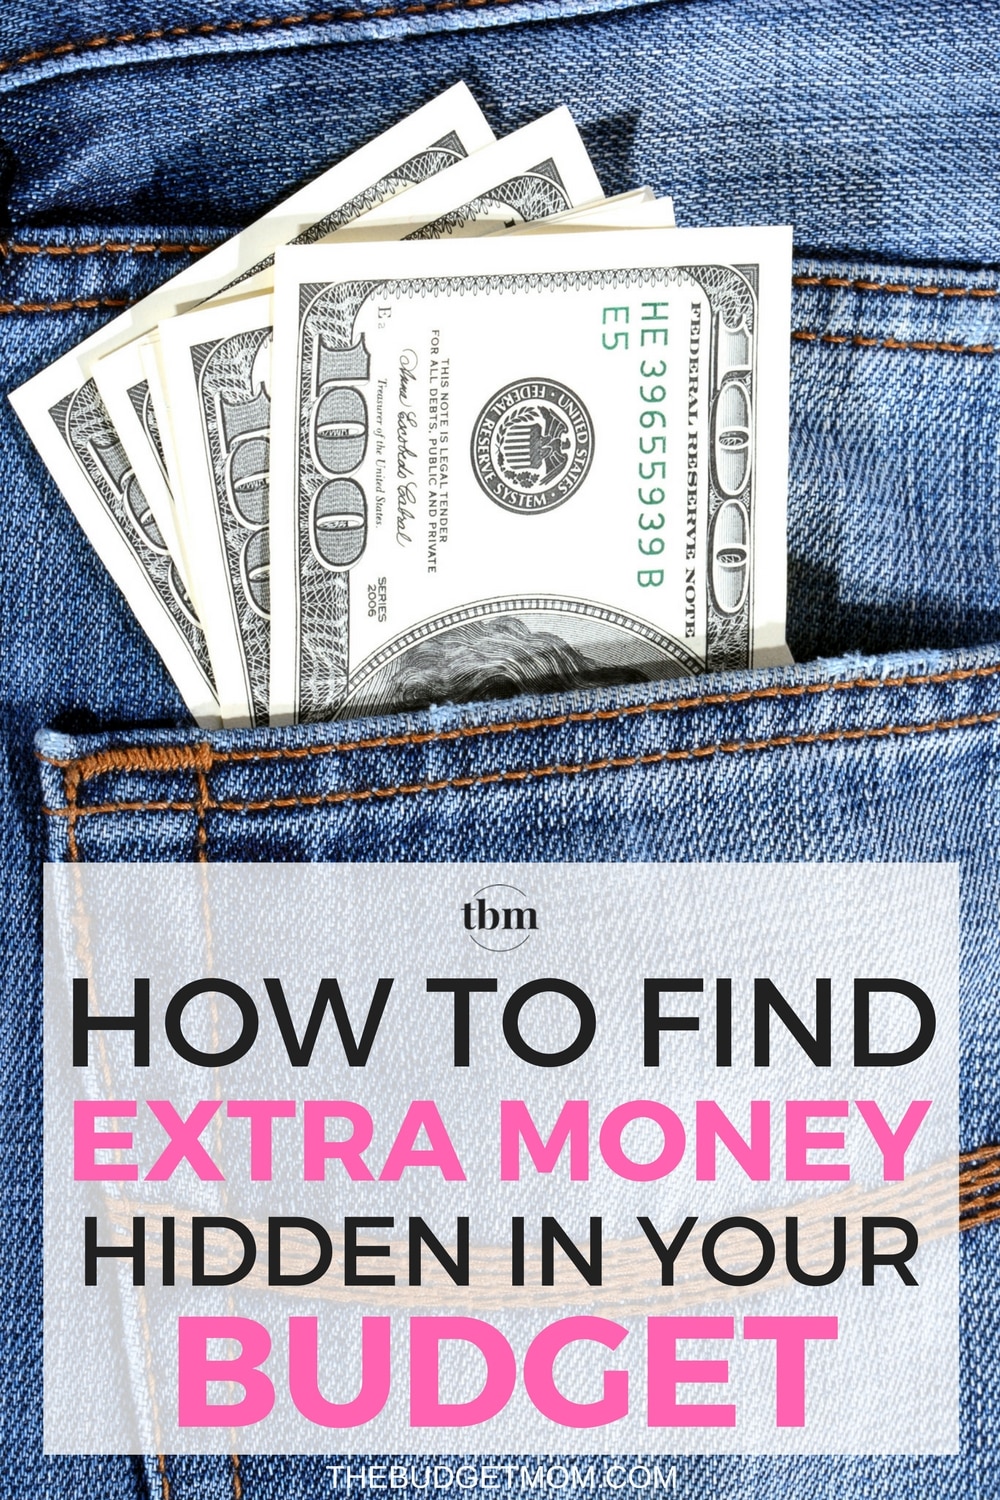 I was able to find an extra $200 in my budget by reducing my fixed expenses, and by making a subtle change on how I spent my money. Here is how I was able to afford a new expense when my budget was already stretched thin.